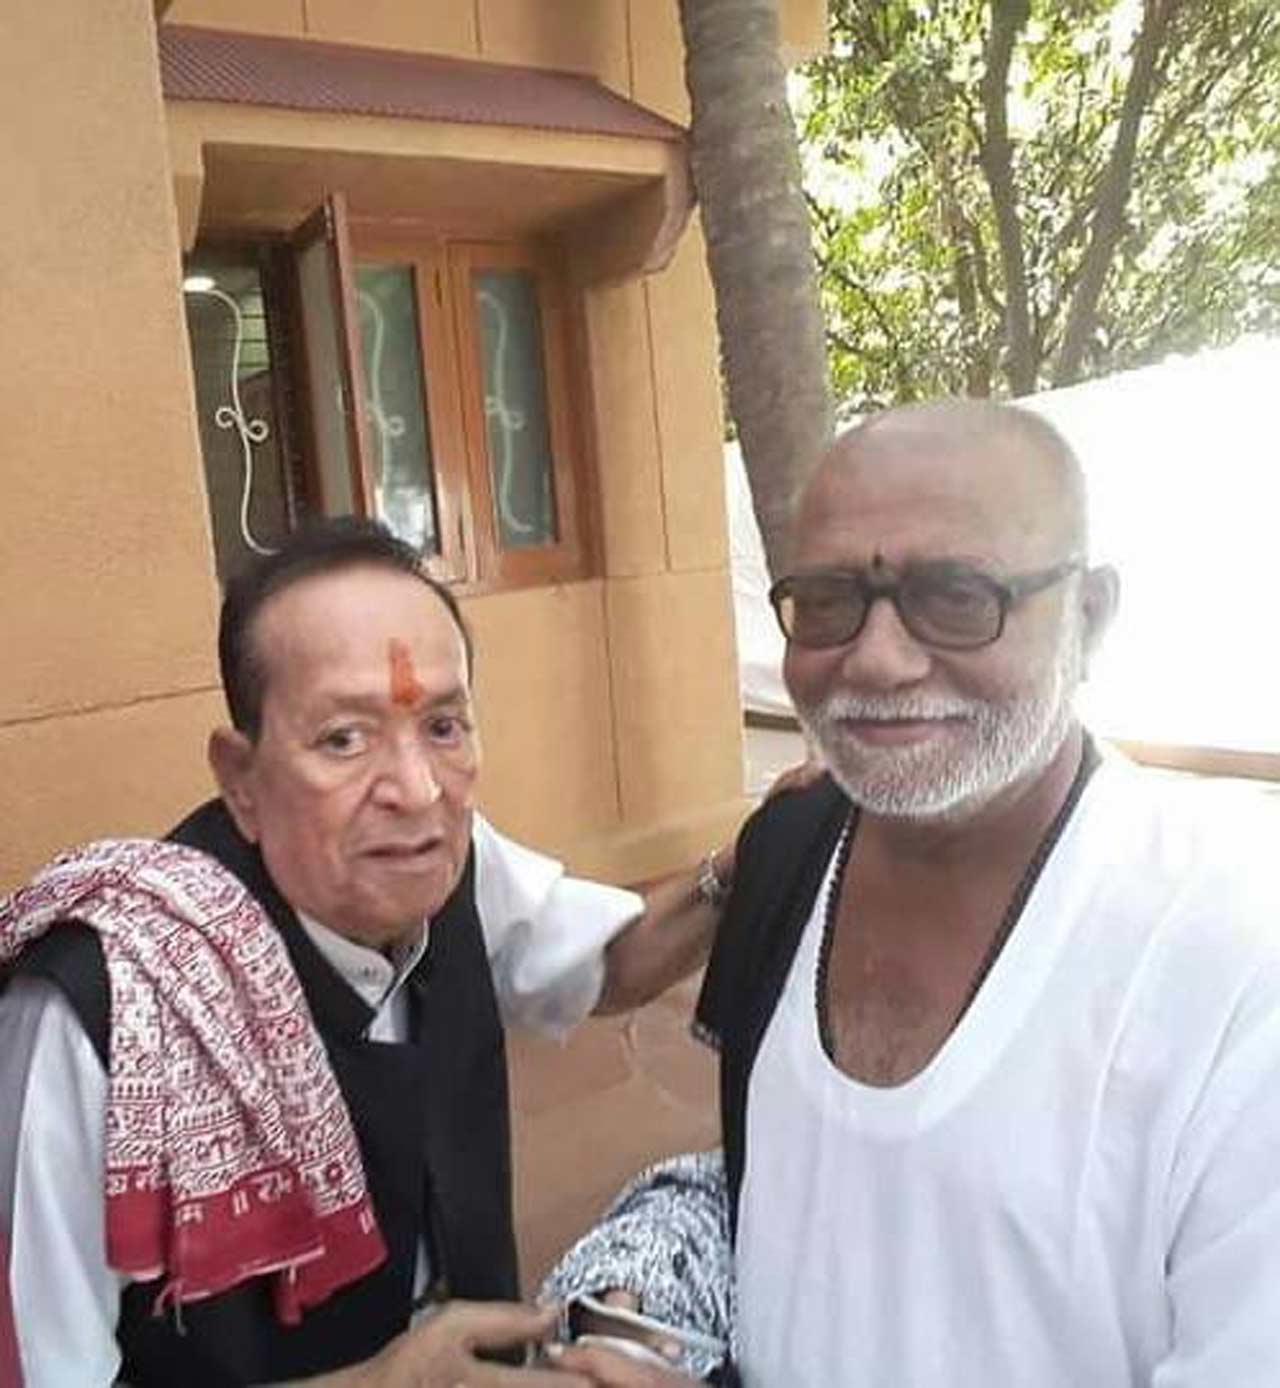 The last rites were performed at the Dahanukarwadi Crematorium in Kandivali on Wednesday. Brother of veteran Gujarati actor Upendra, Arvind Trivedi also acted in another popular television series like Vikram Aur Betaal and Vishwamitra. He featured in over 300 Gujarati and Hindi films.